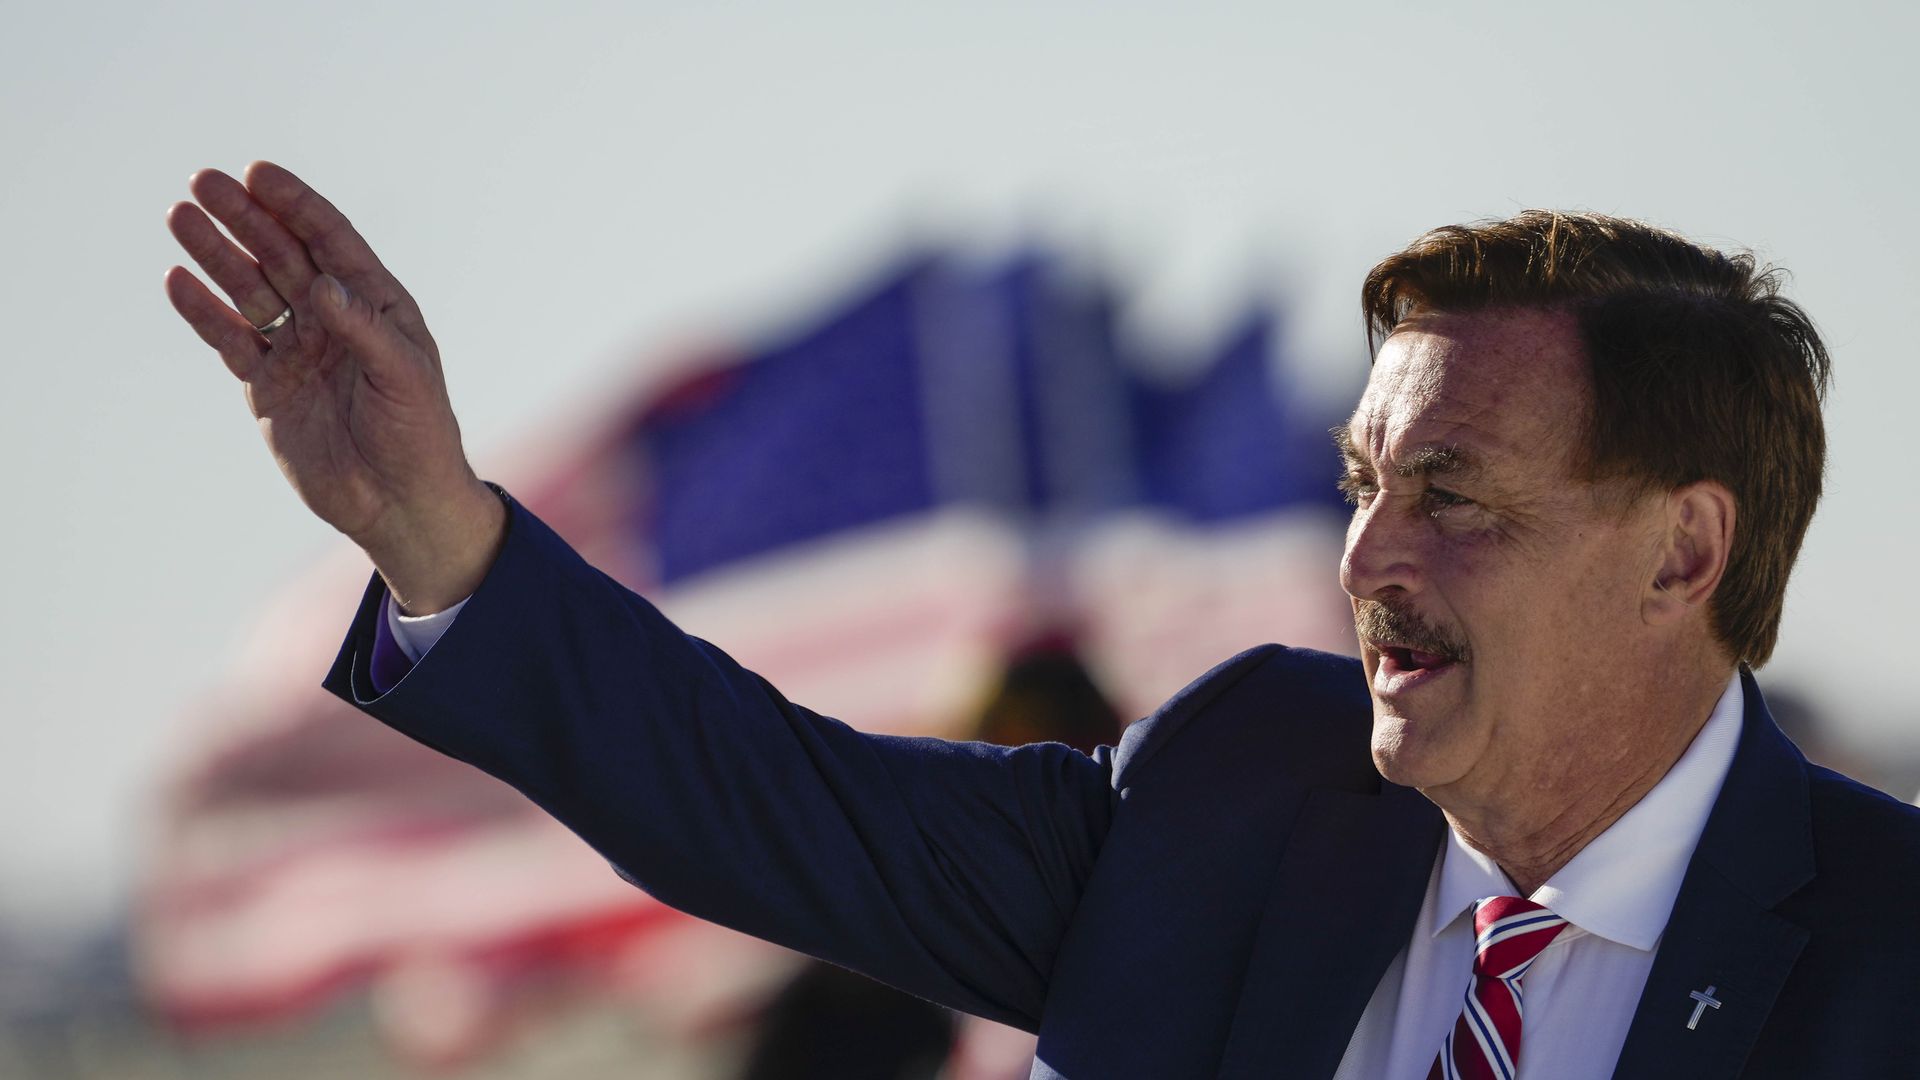 EO of My Pillow Mike Lindell waves to supporters of former U.S. President Donald Trump as they arrive for a rally at the Dayton International Airport on November 7, 2022